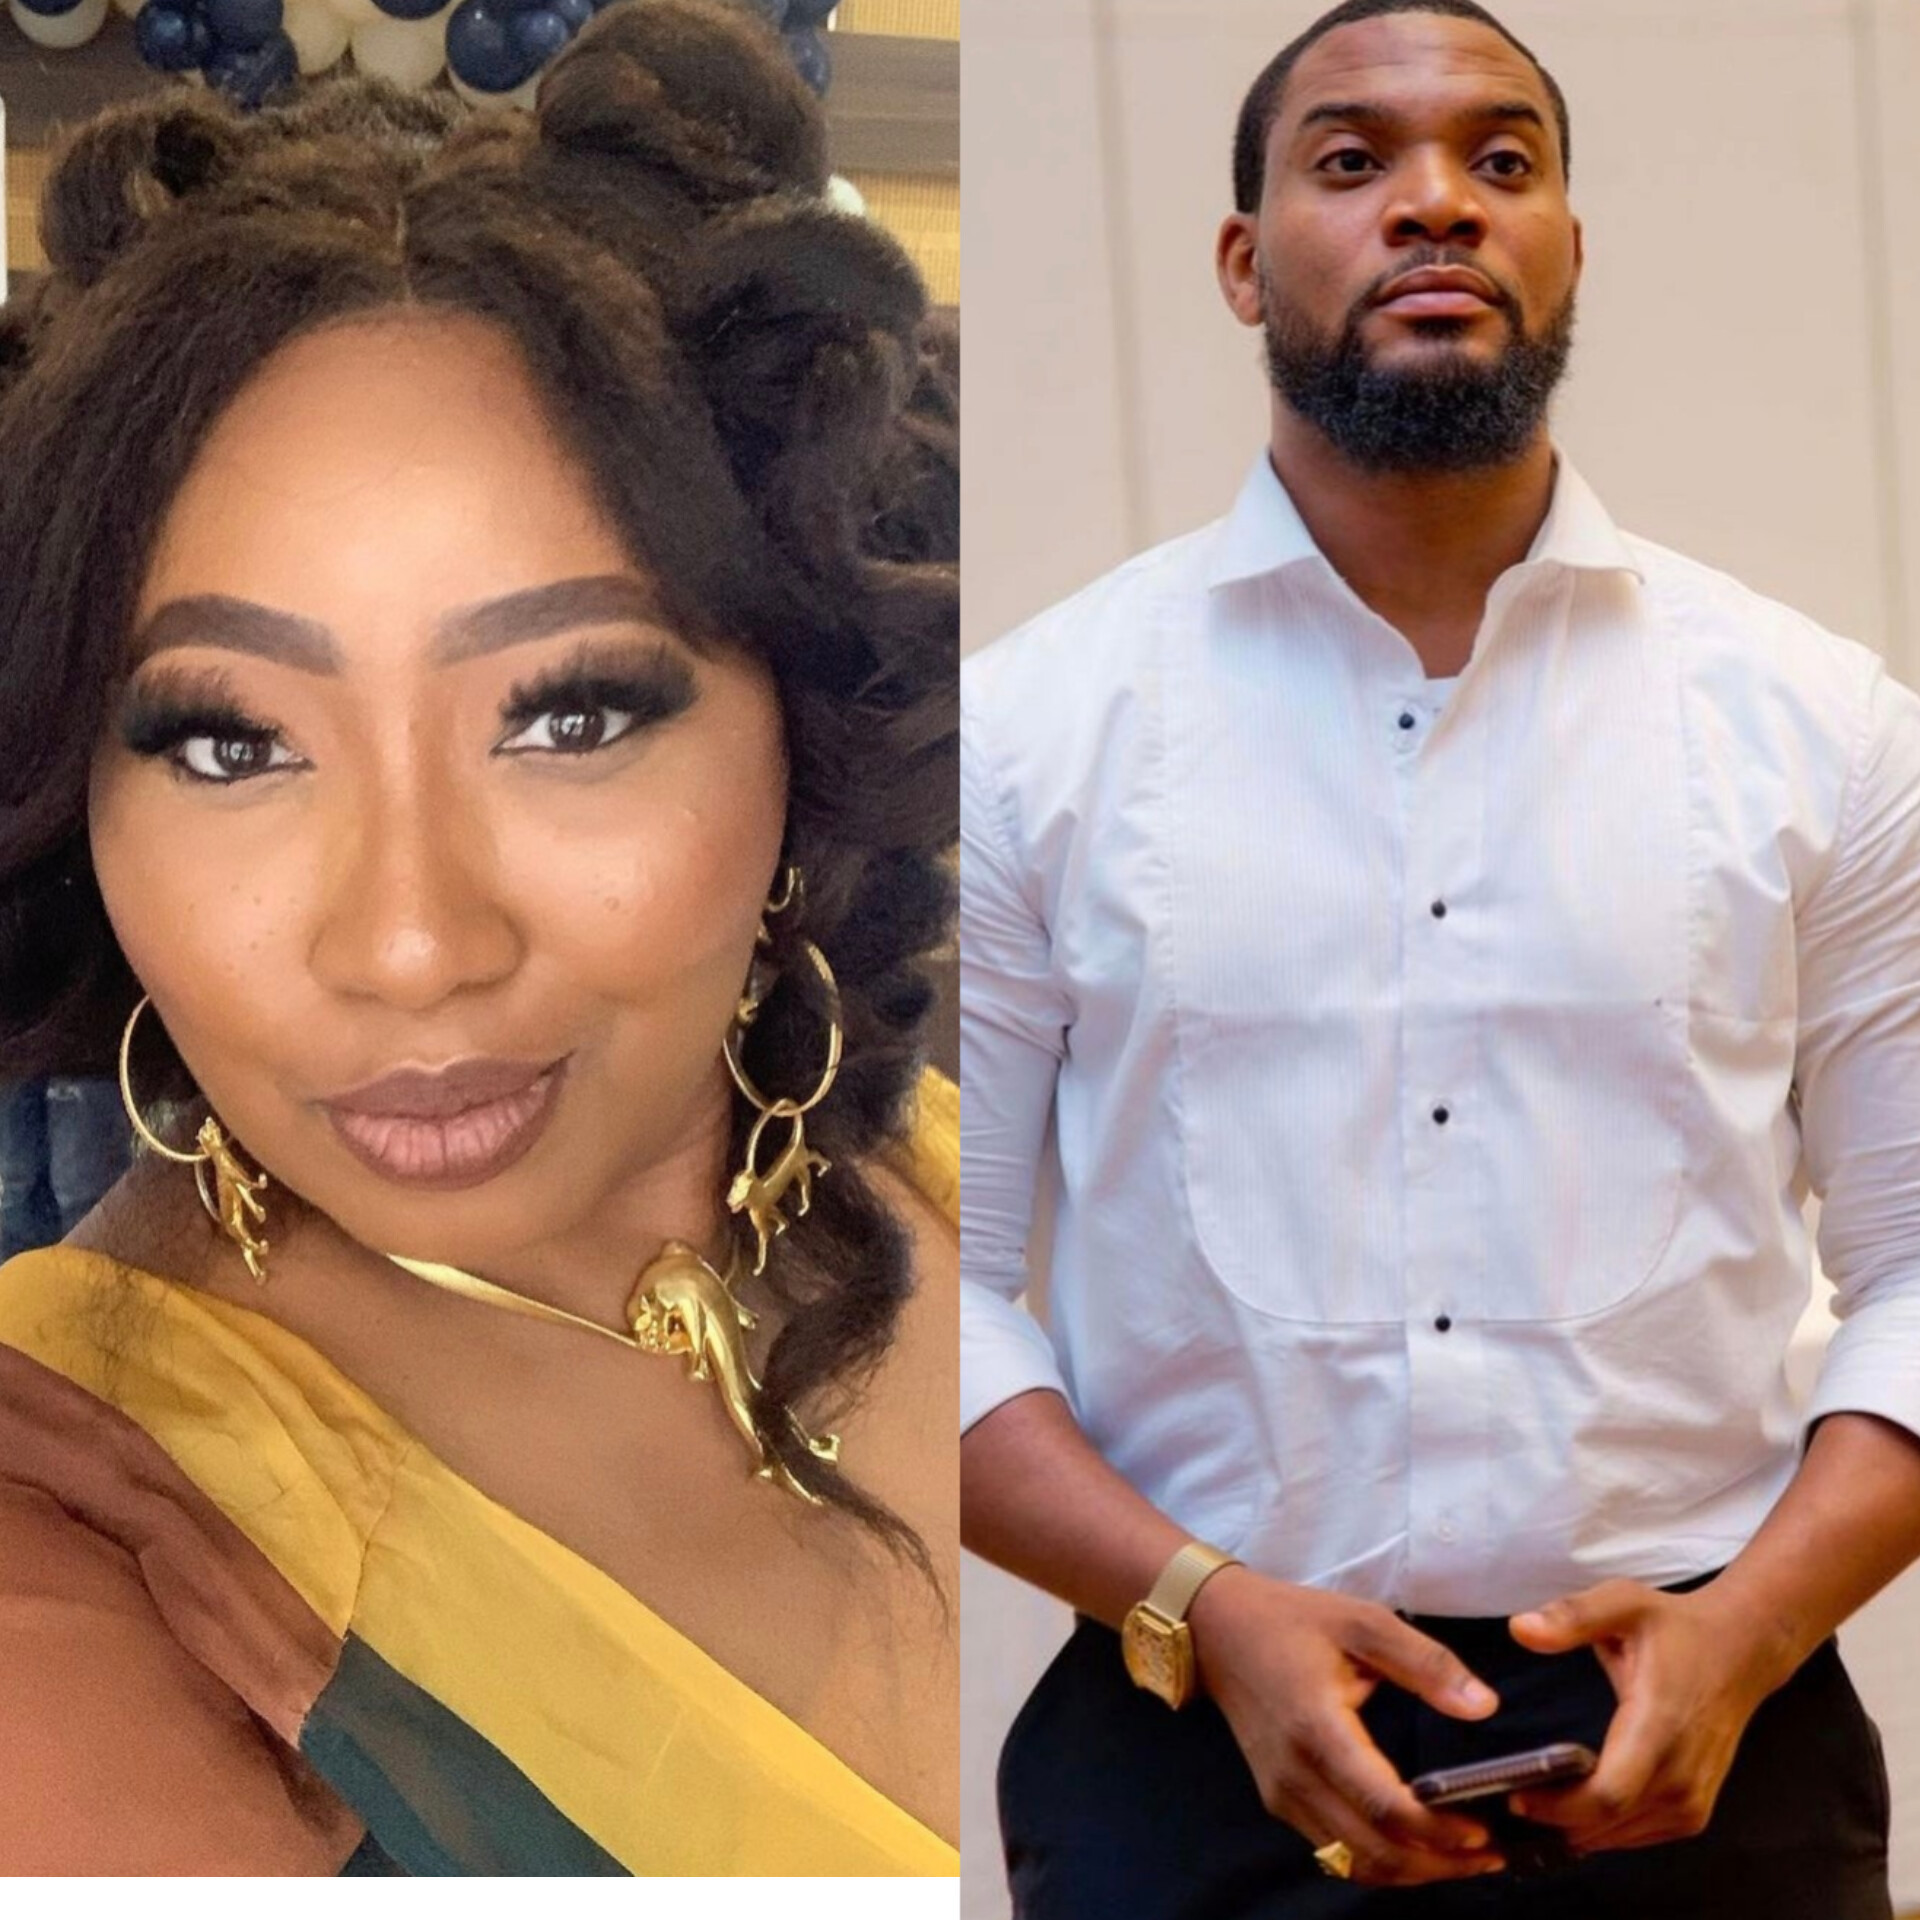 Obi/Soludo clash: Stick to resurrection via mythical birds - Latasha Ngwube knocks actor Kunle Remi over his comment about “reading and understanding;” he responds